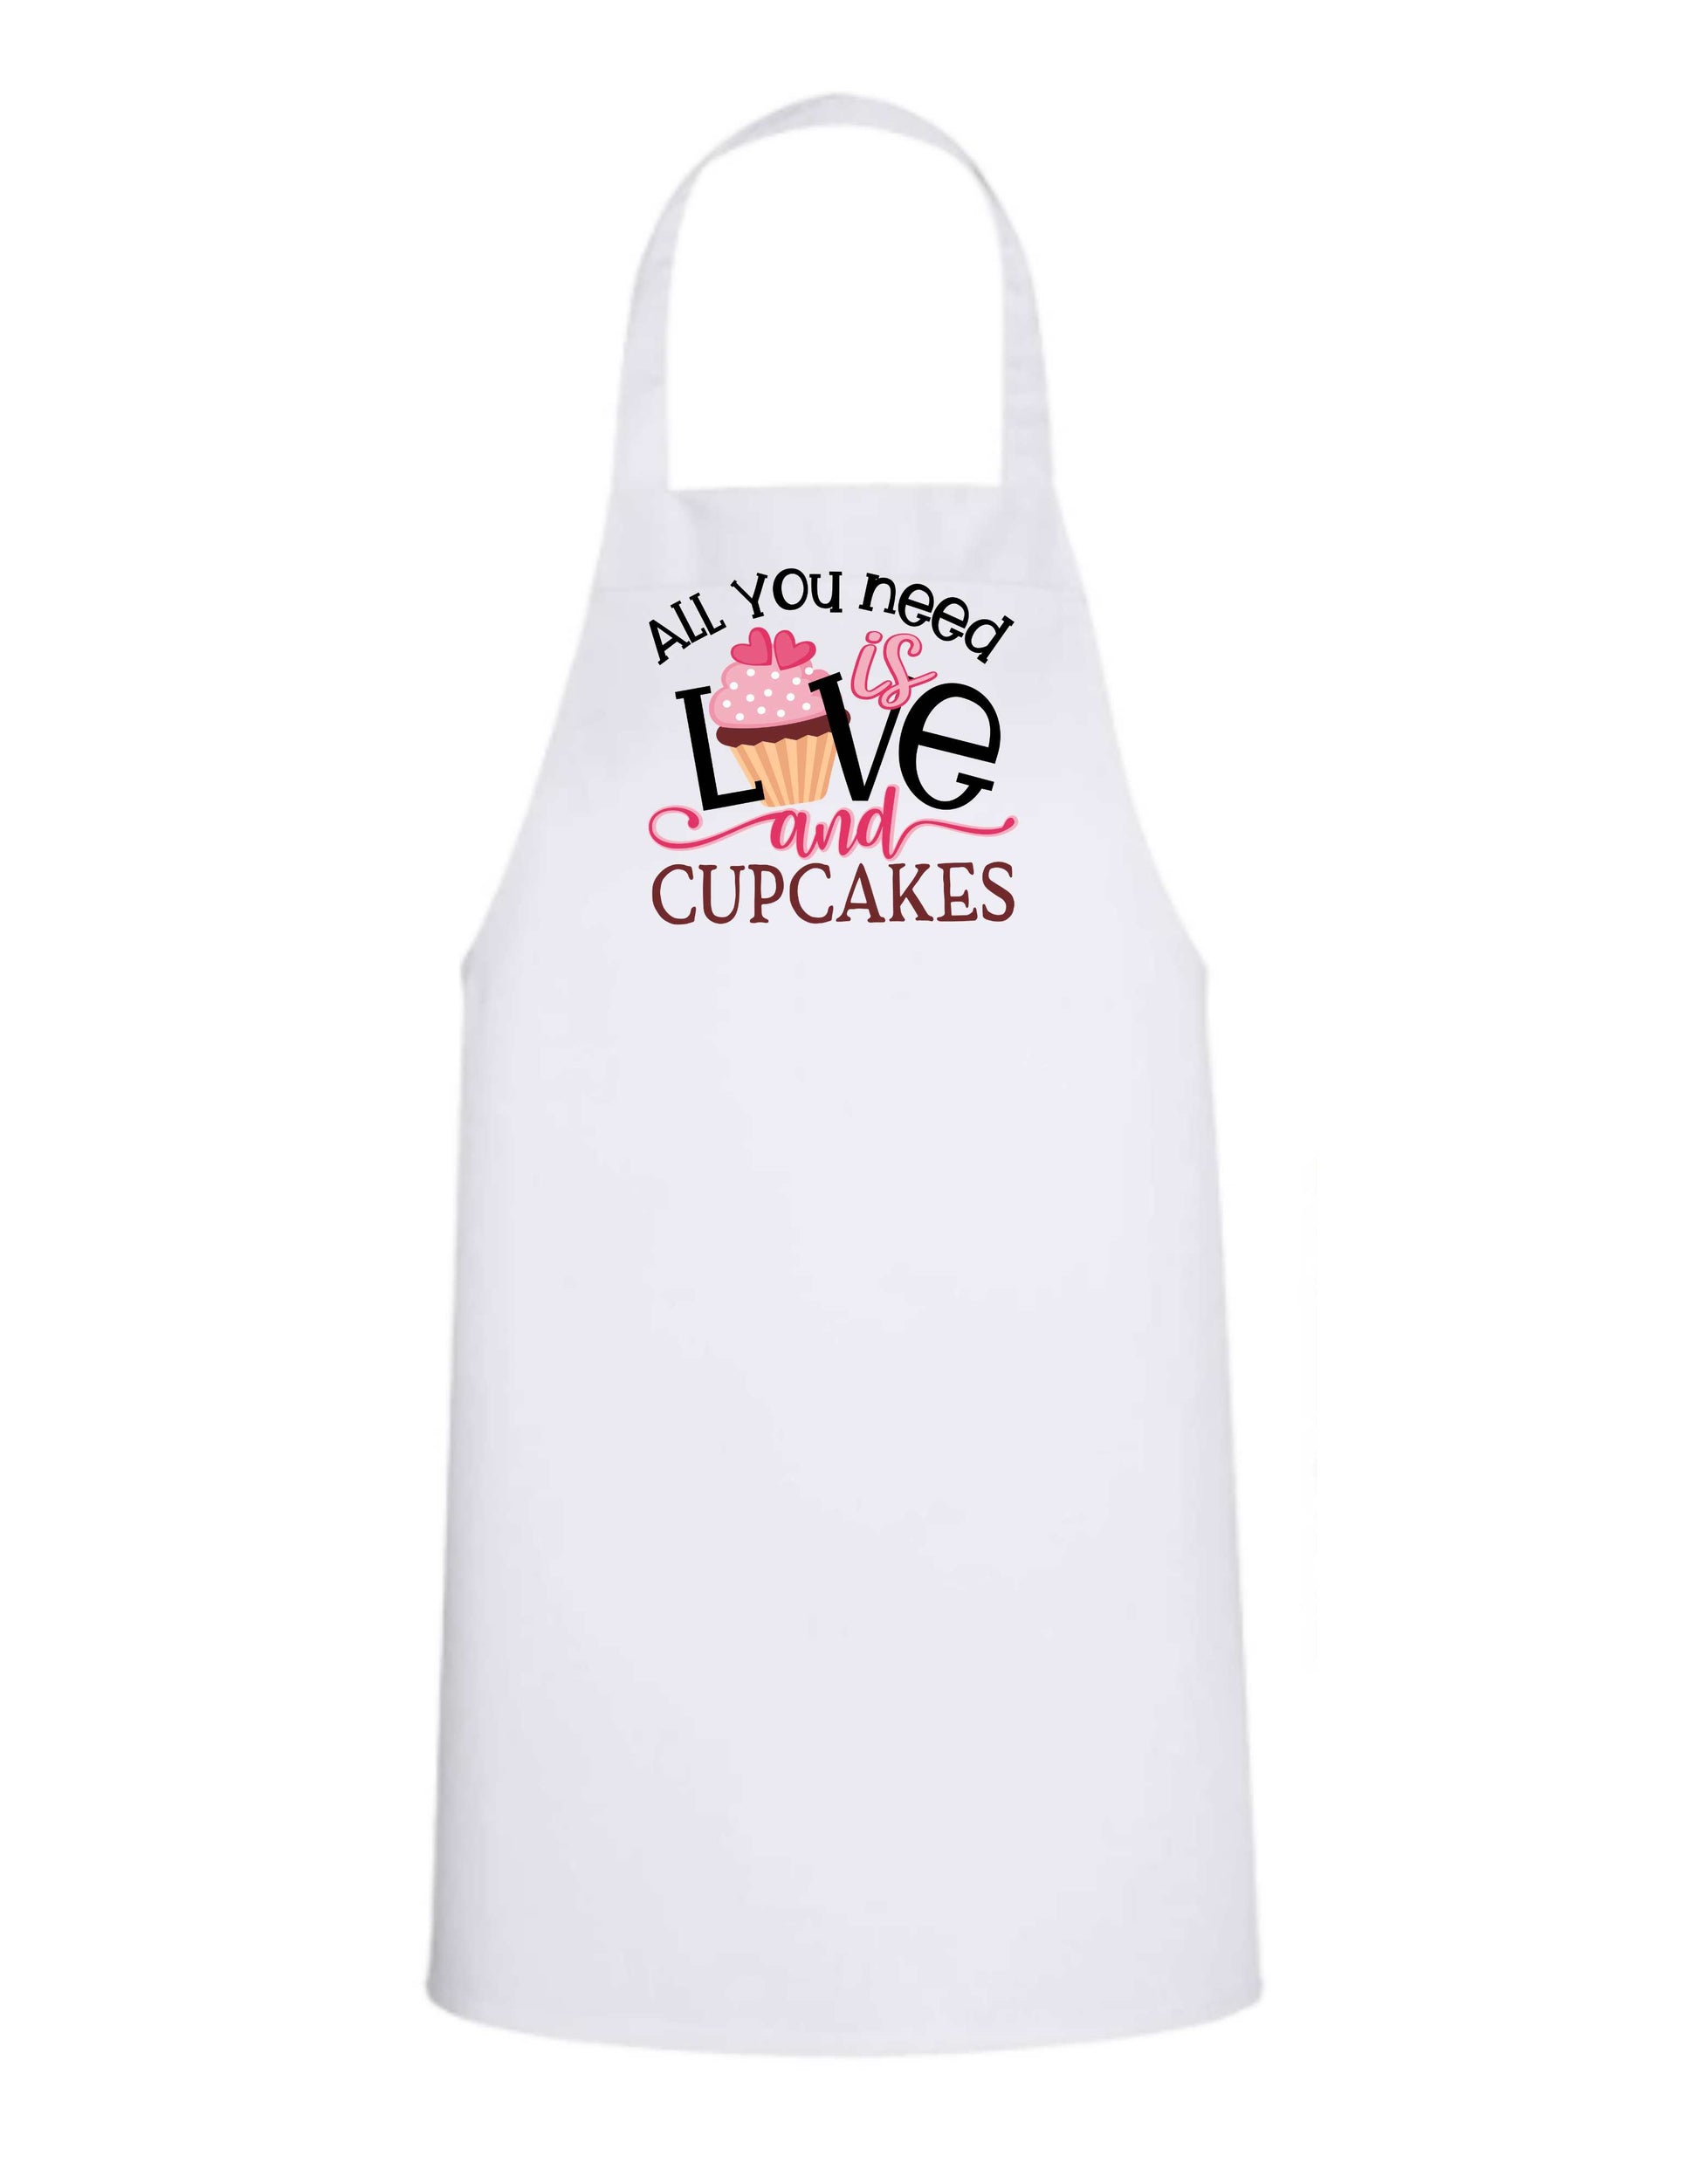 All You Need is Love and Cupcakes - White Apron with Color design Great Gift